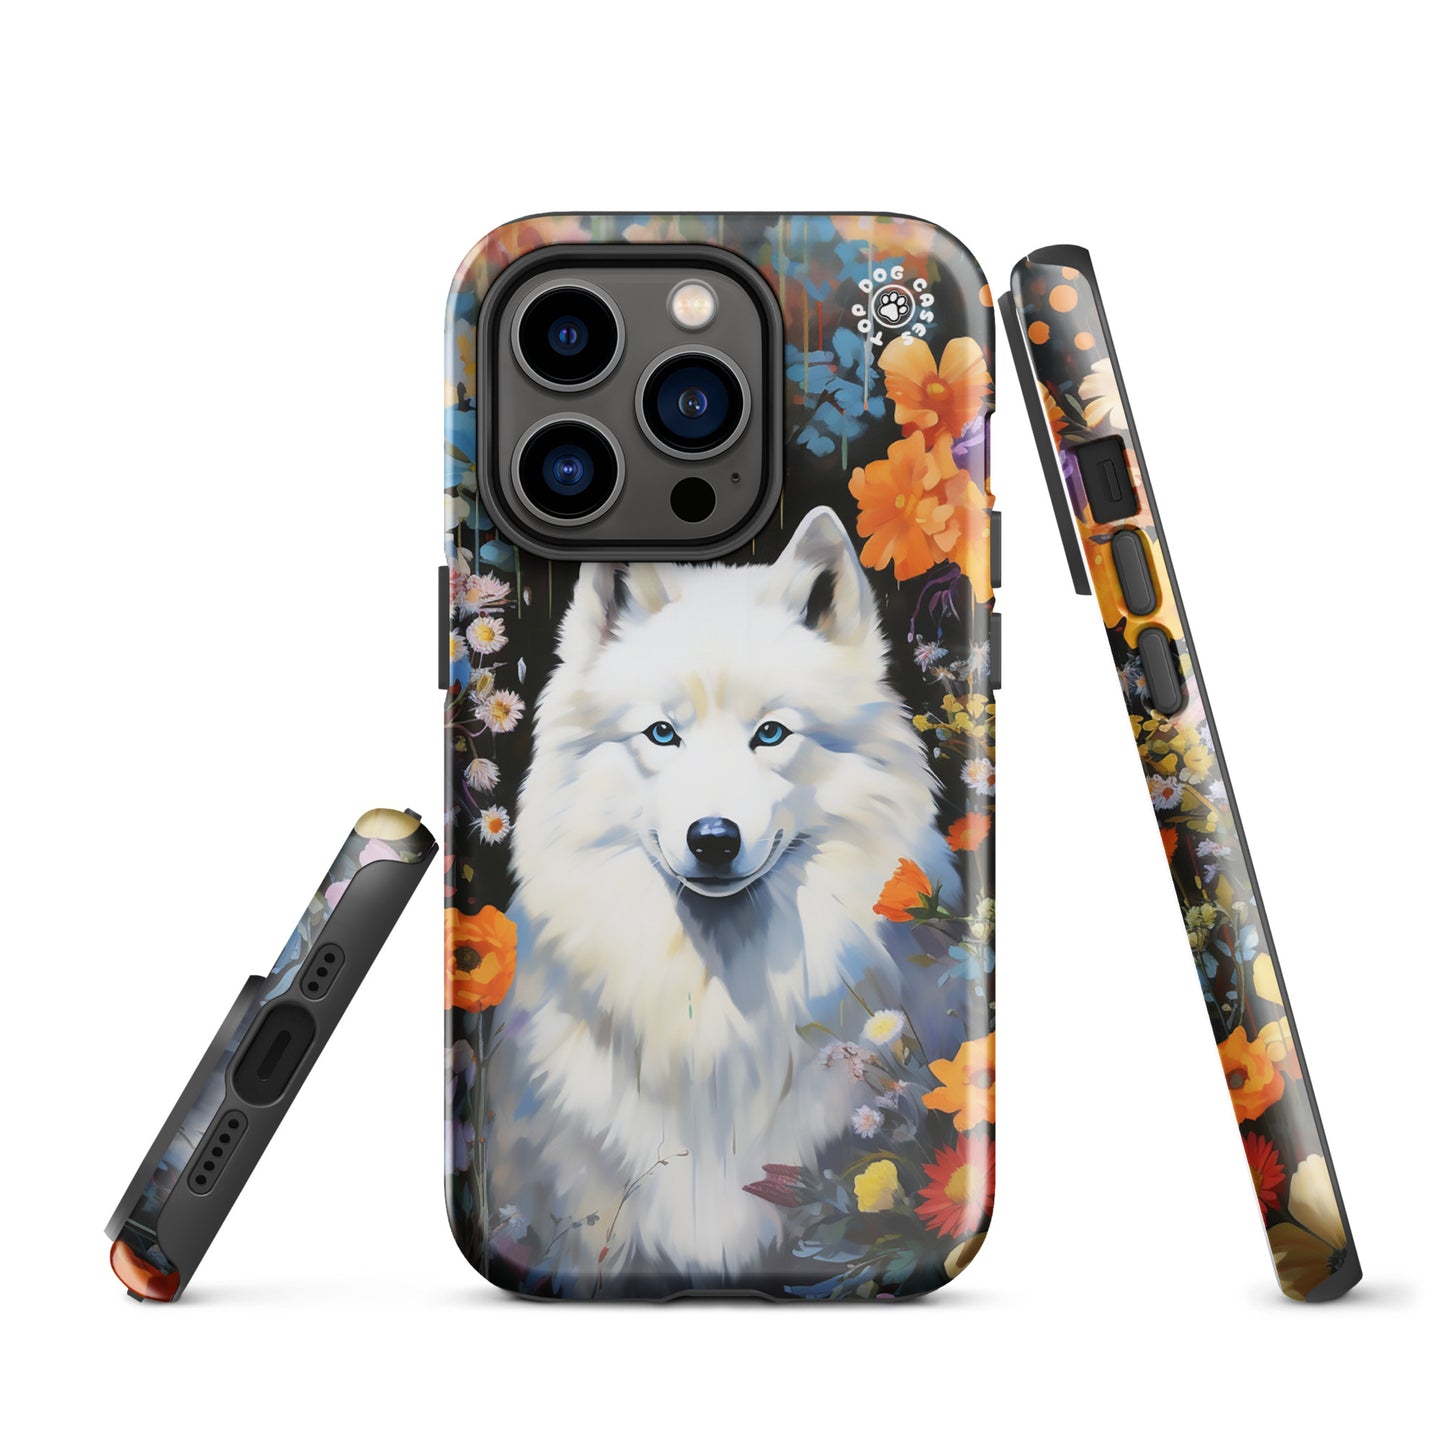 White Siberian Husky - iPhone Case - Aesthetic Phone Cases - Top Dog Cases - #CuteDog, #CuteDogs, #Flowers, #Husky, #iPhone, #iPhone11, #iphone11case, #iPhone12, #iPhone12case, #iPhone13, #iPhone13case, #iPhone13DogCase, #iPhone13Mini, #iPhone13Pro, #iPhone13ProMax, #iPhone14, #iPhone14case, #iPhone14DogCase, #iPhone14Plus, #iPhone14Pluscase, #iPhone14Pro, #iPhone14ProMax, #iPhone14ProMaxCase, #iPhone15, #iPhone15case, #iPhonecase, #iphonedogcase, #Siberian Husky, #White Siberian Husky, DogsandFlowers